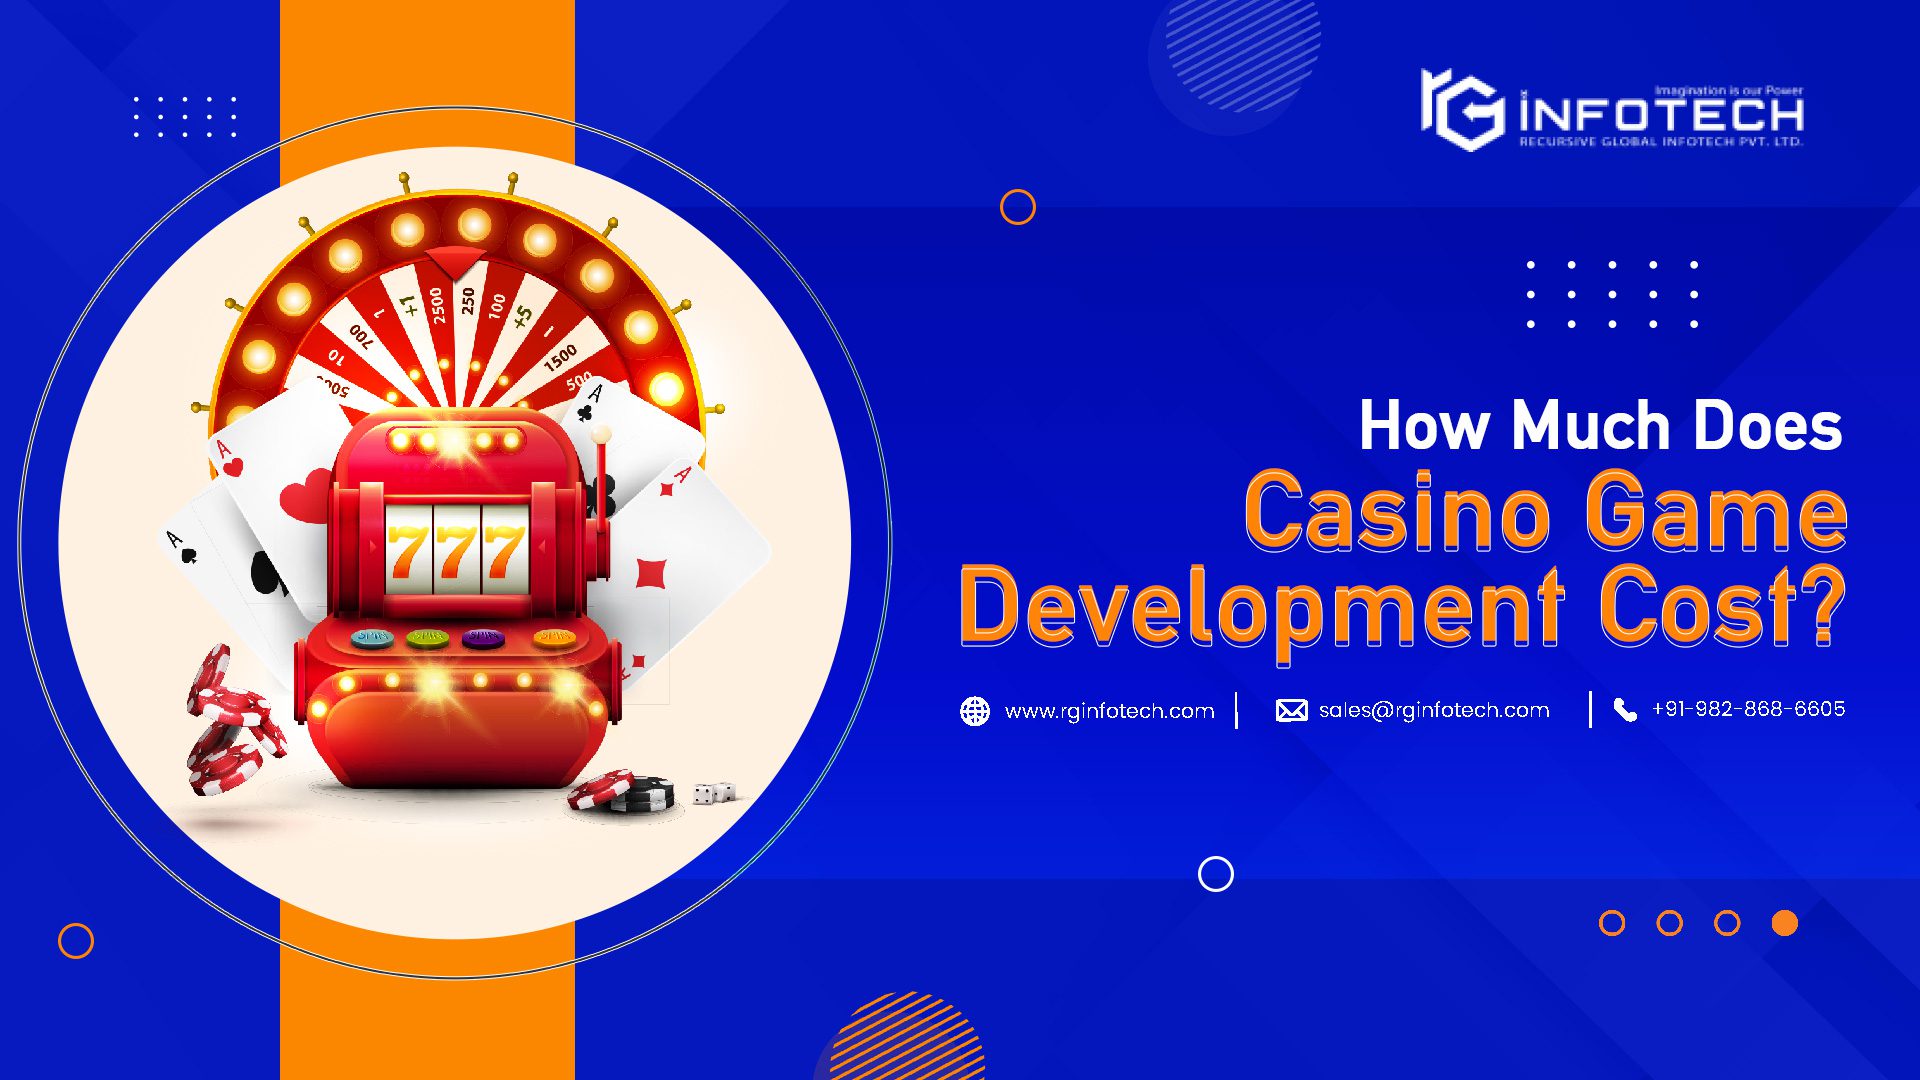 How Much Does Casino Game Development Cost